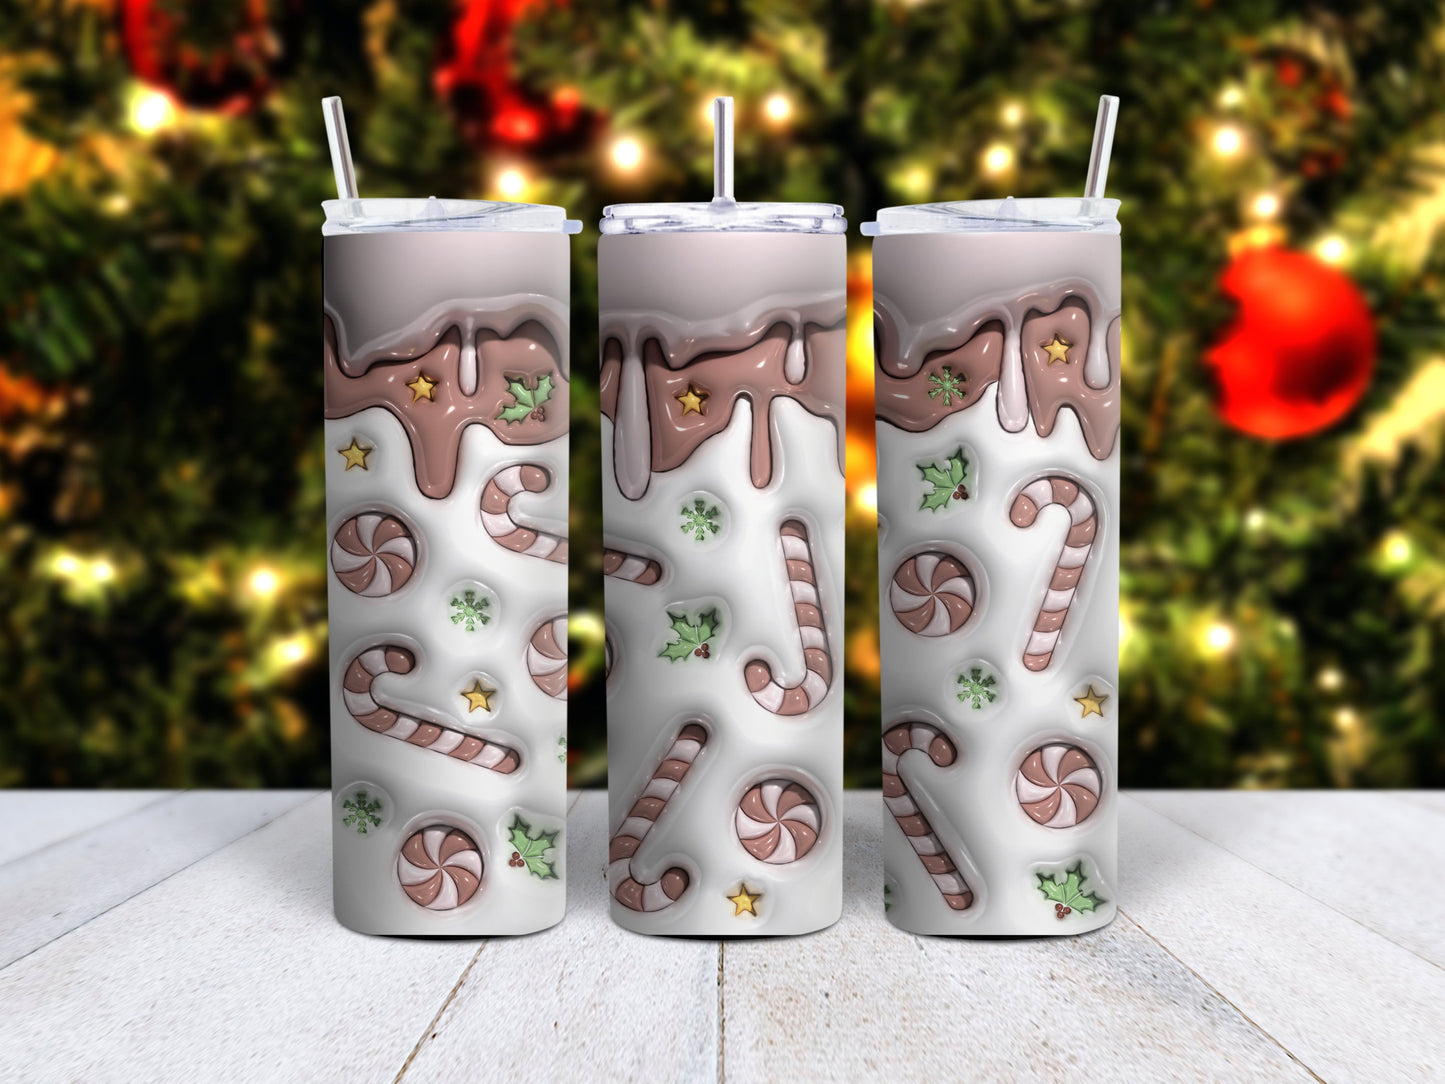 Inflated 3D tumbler designs in multiple colors with dripping sides and candy canes